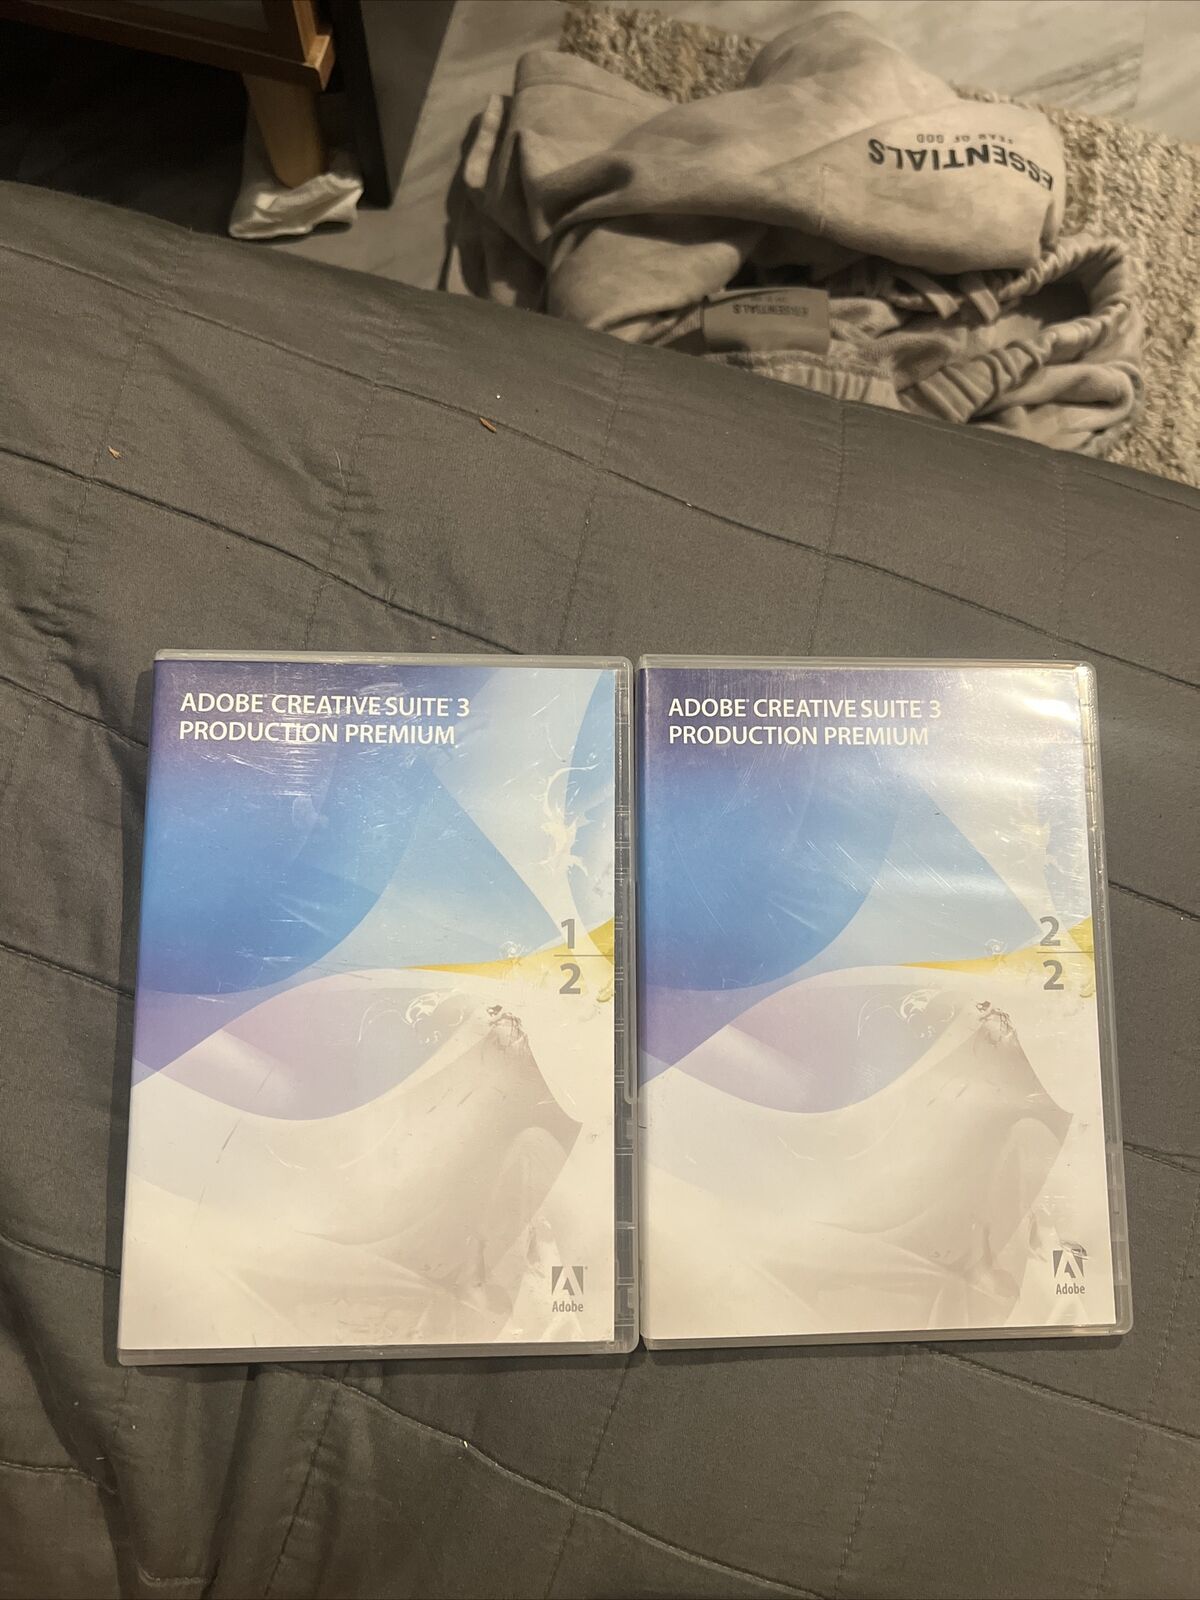 Adobe Creative Suite 3 (Production Premium) Windows with serial numbers